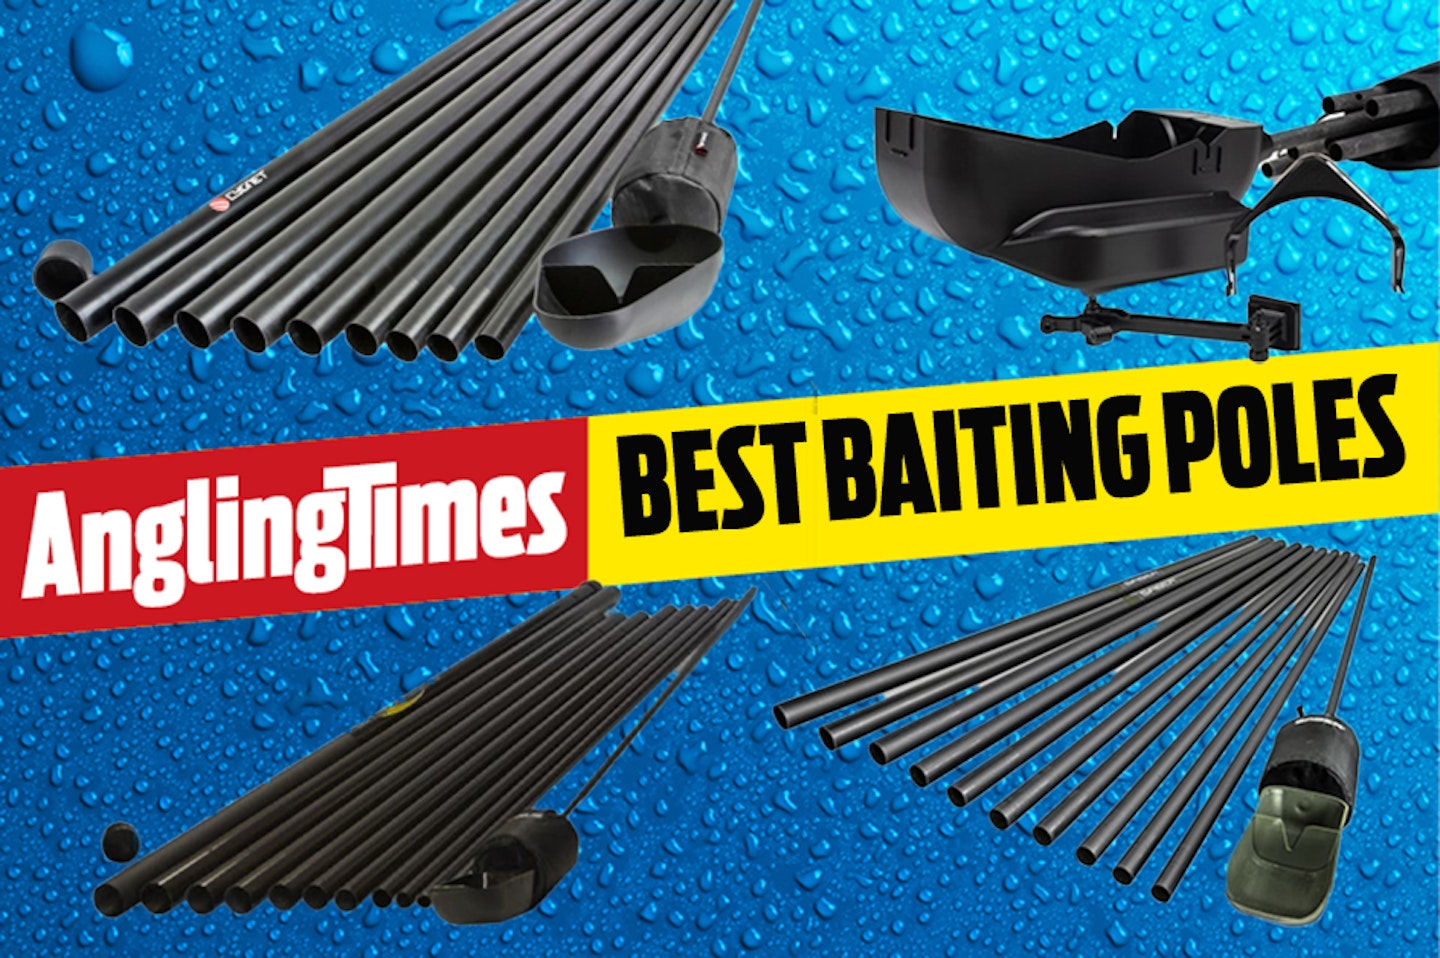 The best baiting poles